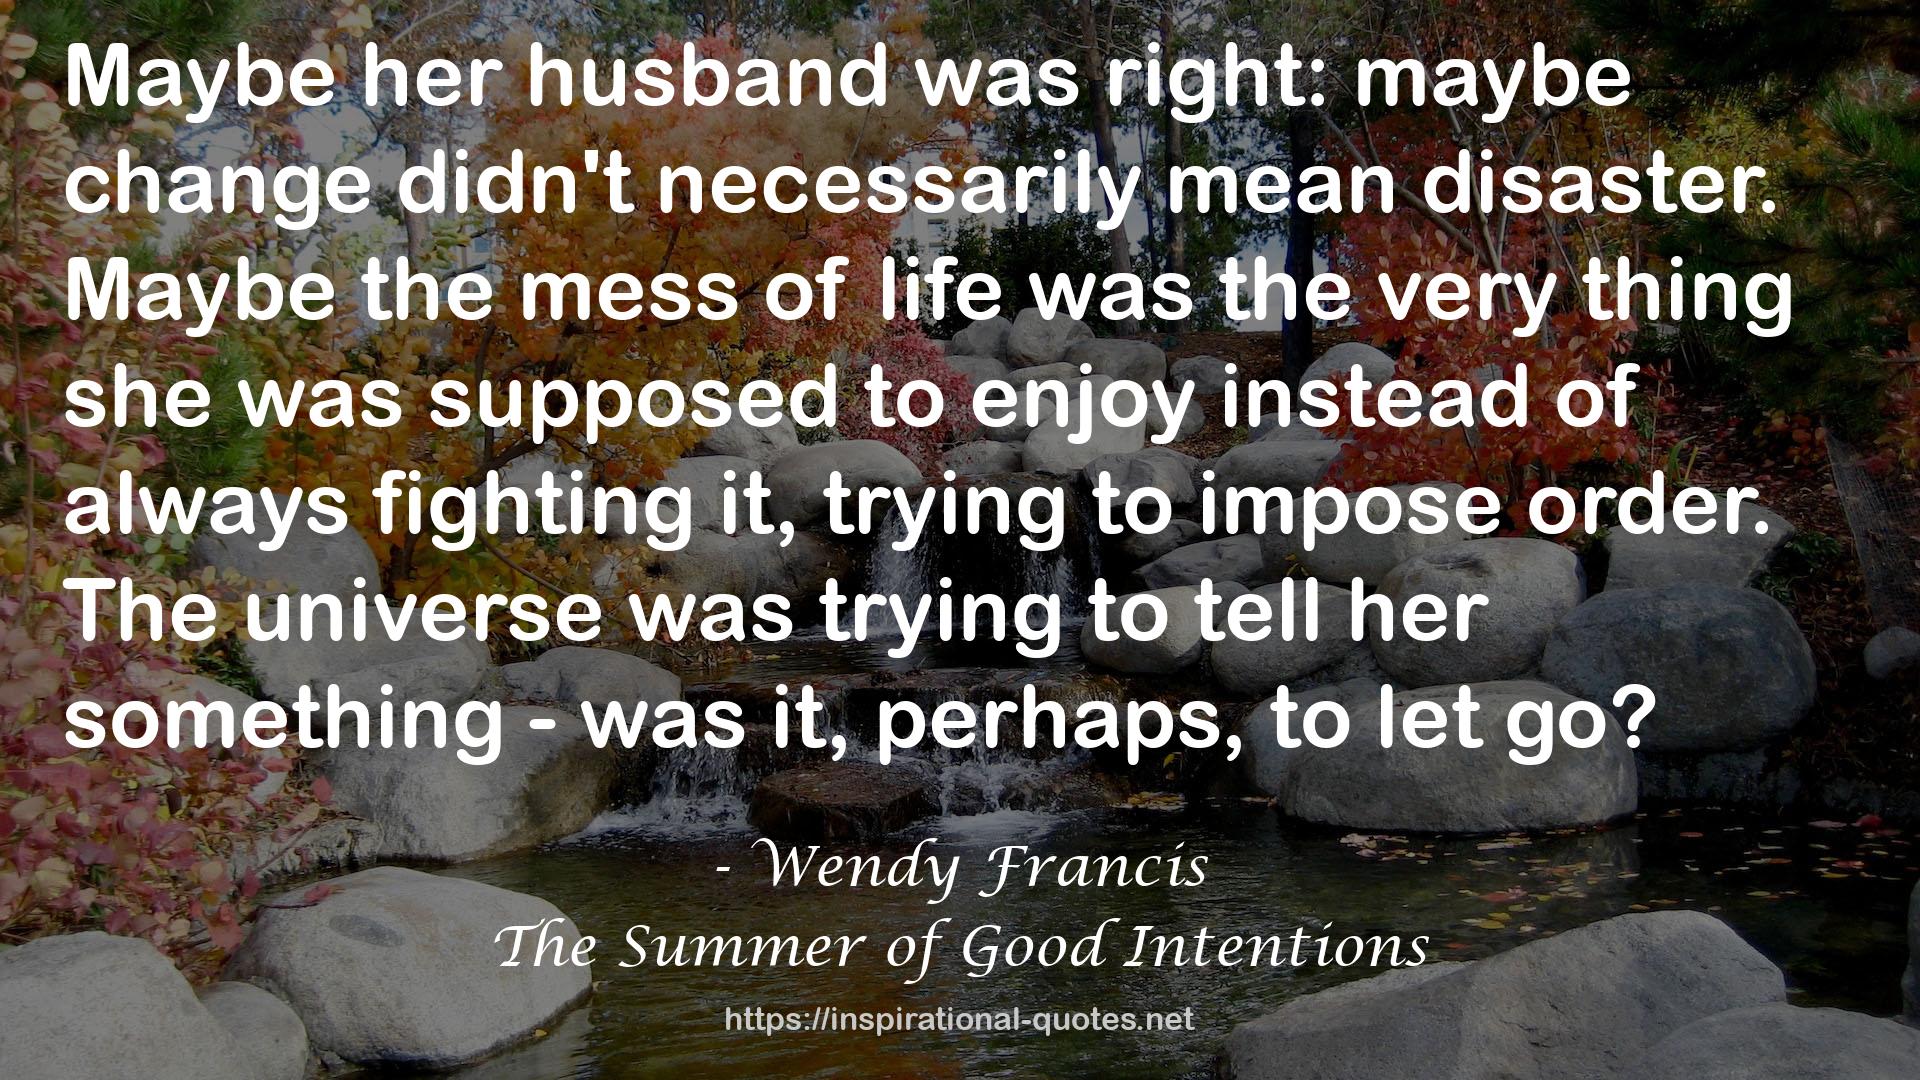 The Summer of Good Intentions QUOTES